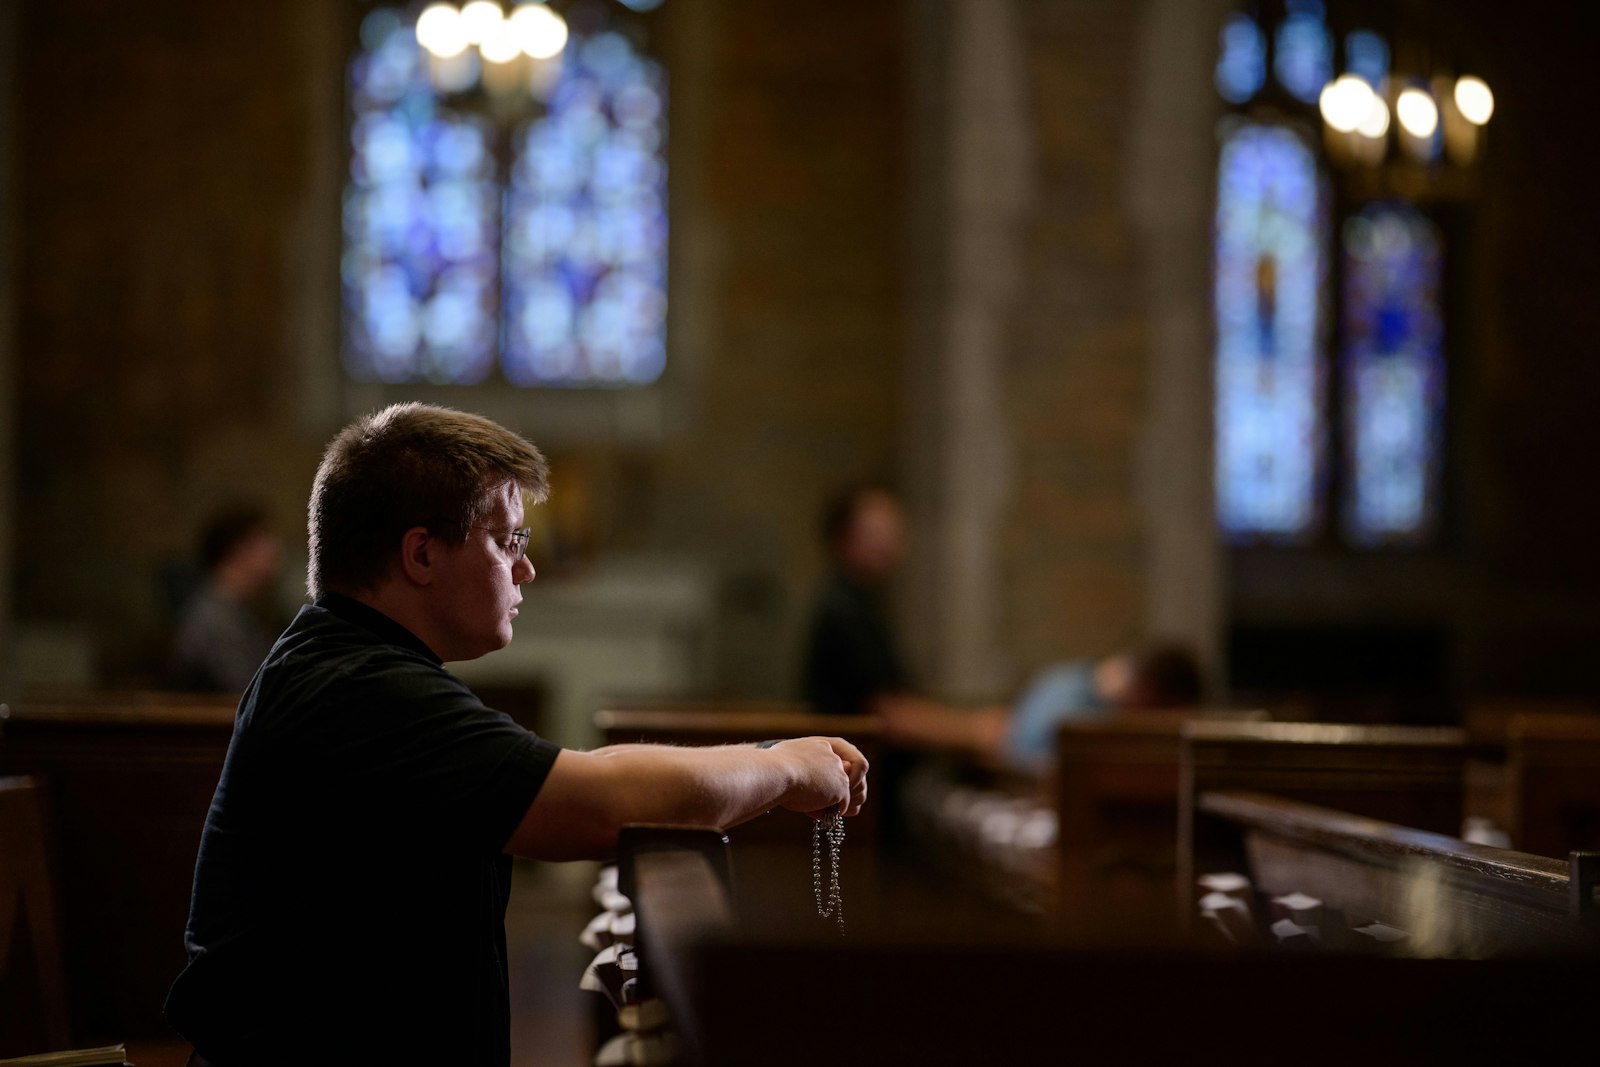 A seminarian spends time in prayer in the chapel of Sacred Heart Major Seminary. Withdrawing from the world to focus on prayer and relationship with God and others isn't a new concept, Fr. Pullis said, but in a world dominated by technology, building healthy habits will contribute to forming better priests.